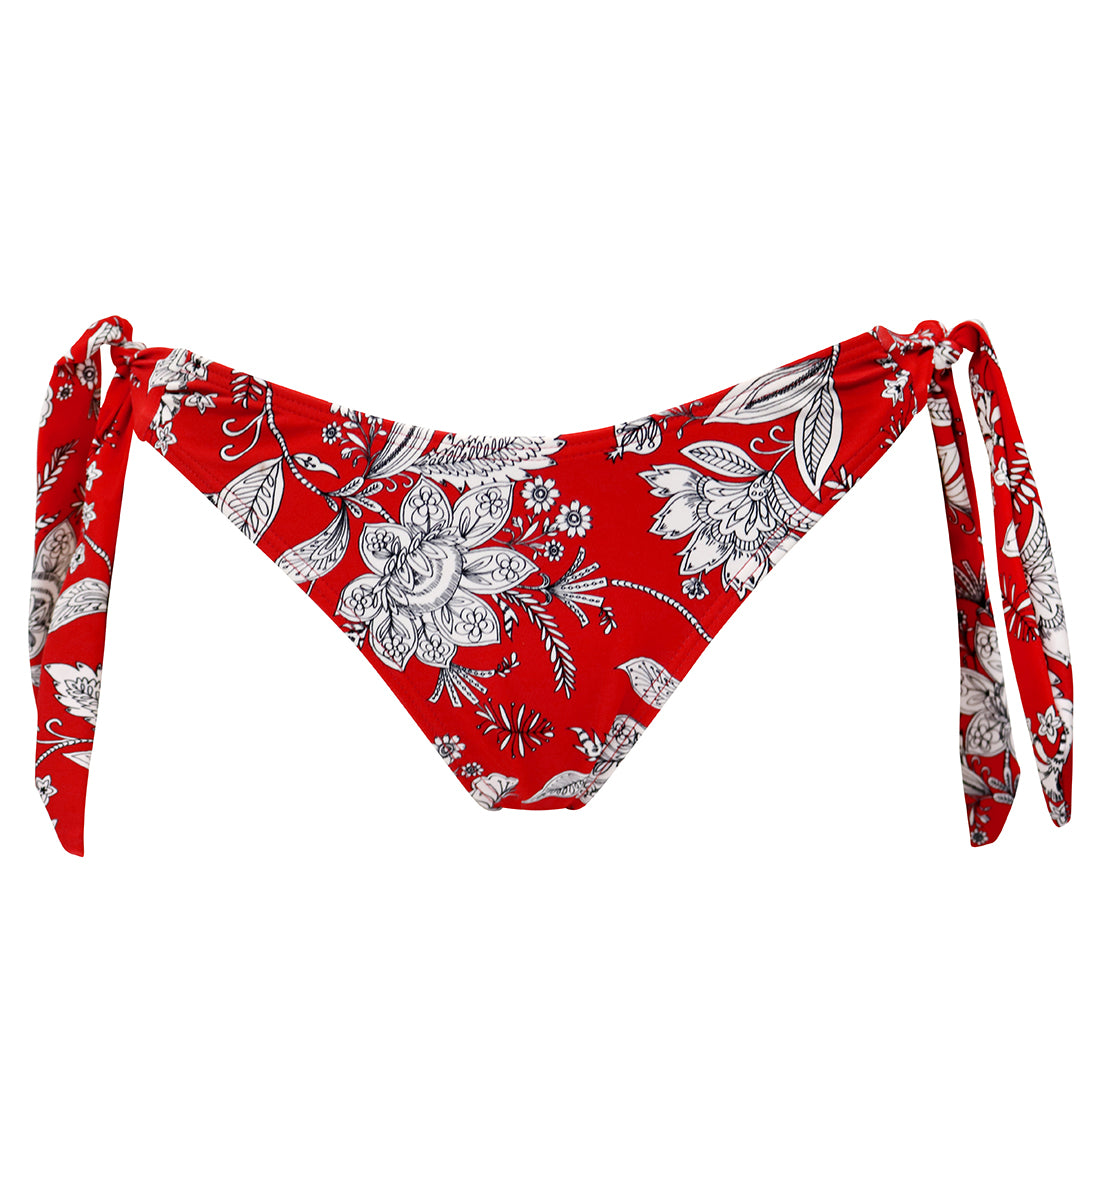 Pour Moi Freedom High Leg Tie Side Swim Brief (25504),XS,Red/White - Red/White,XS